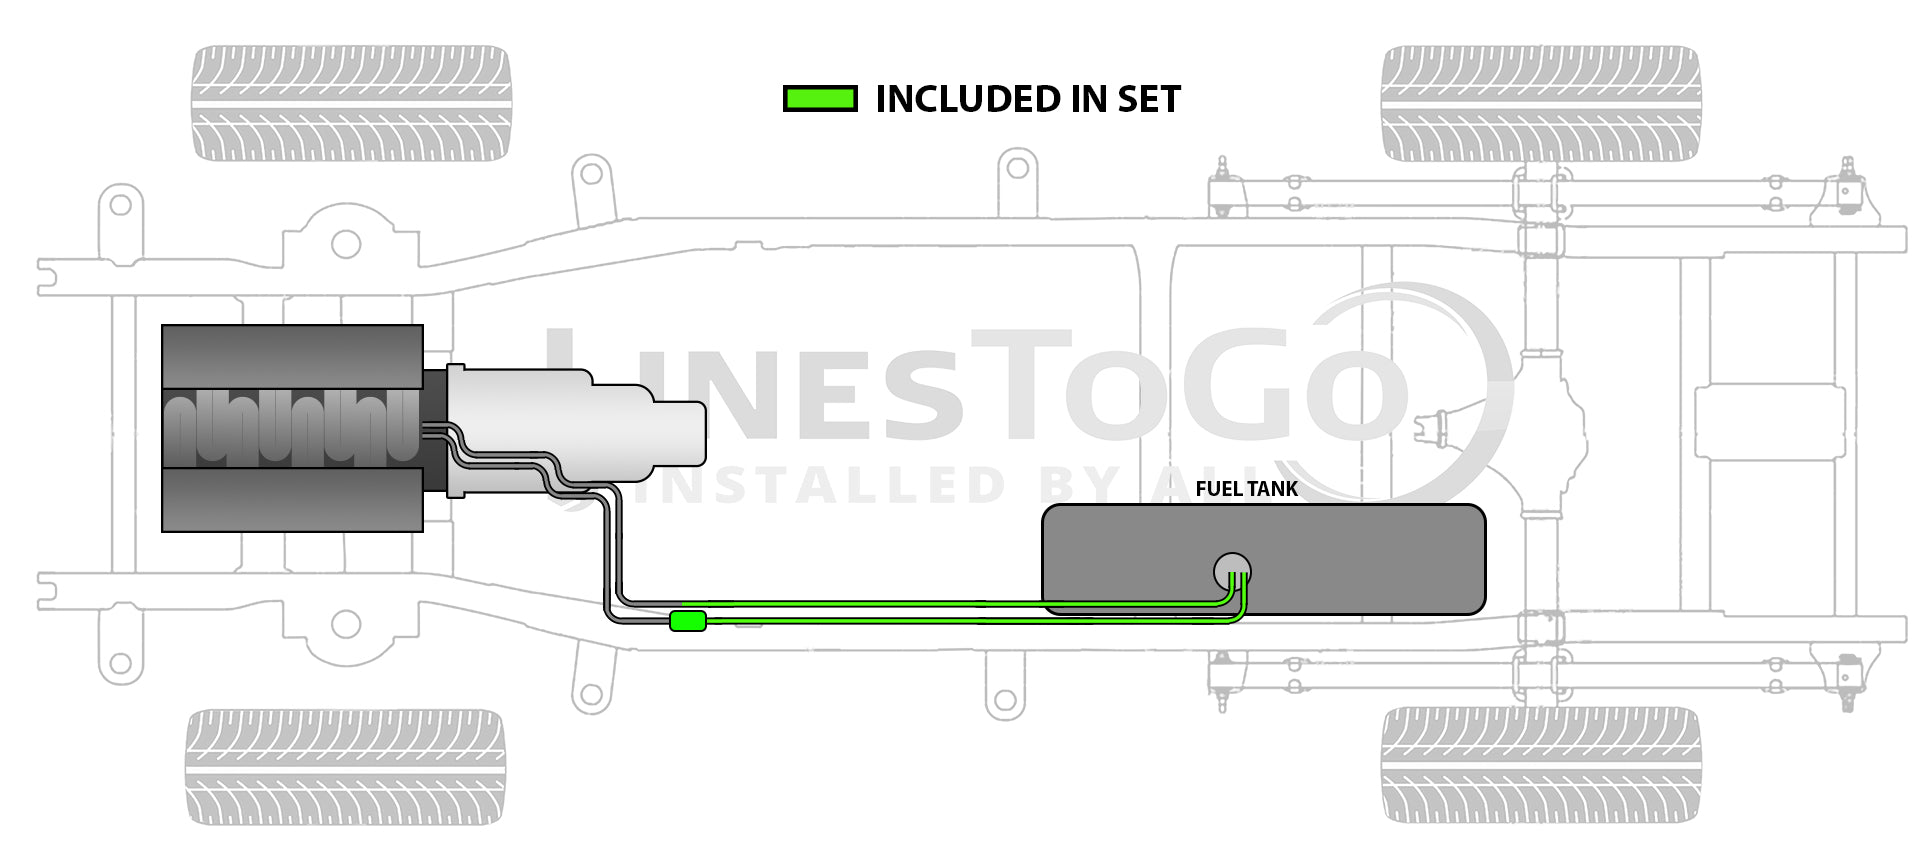 Chevy Truck Rear Fuel Line Set 1995 Reg Cab 8 ft Bed 4WD 5.7L Gas SS400-S1W Stainless Steel